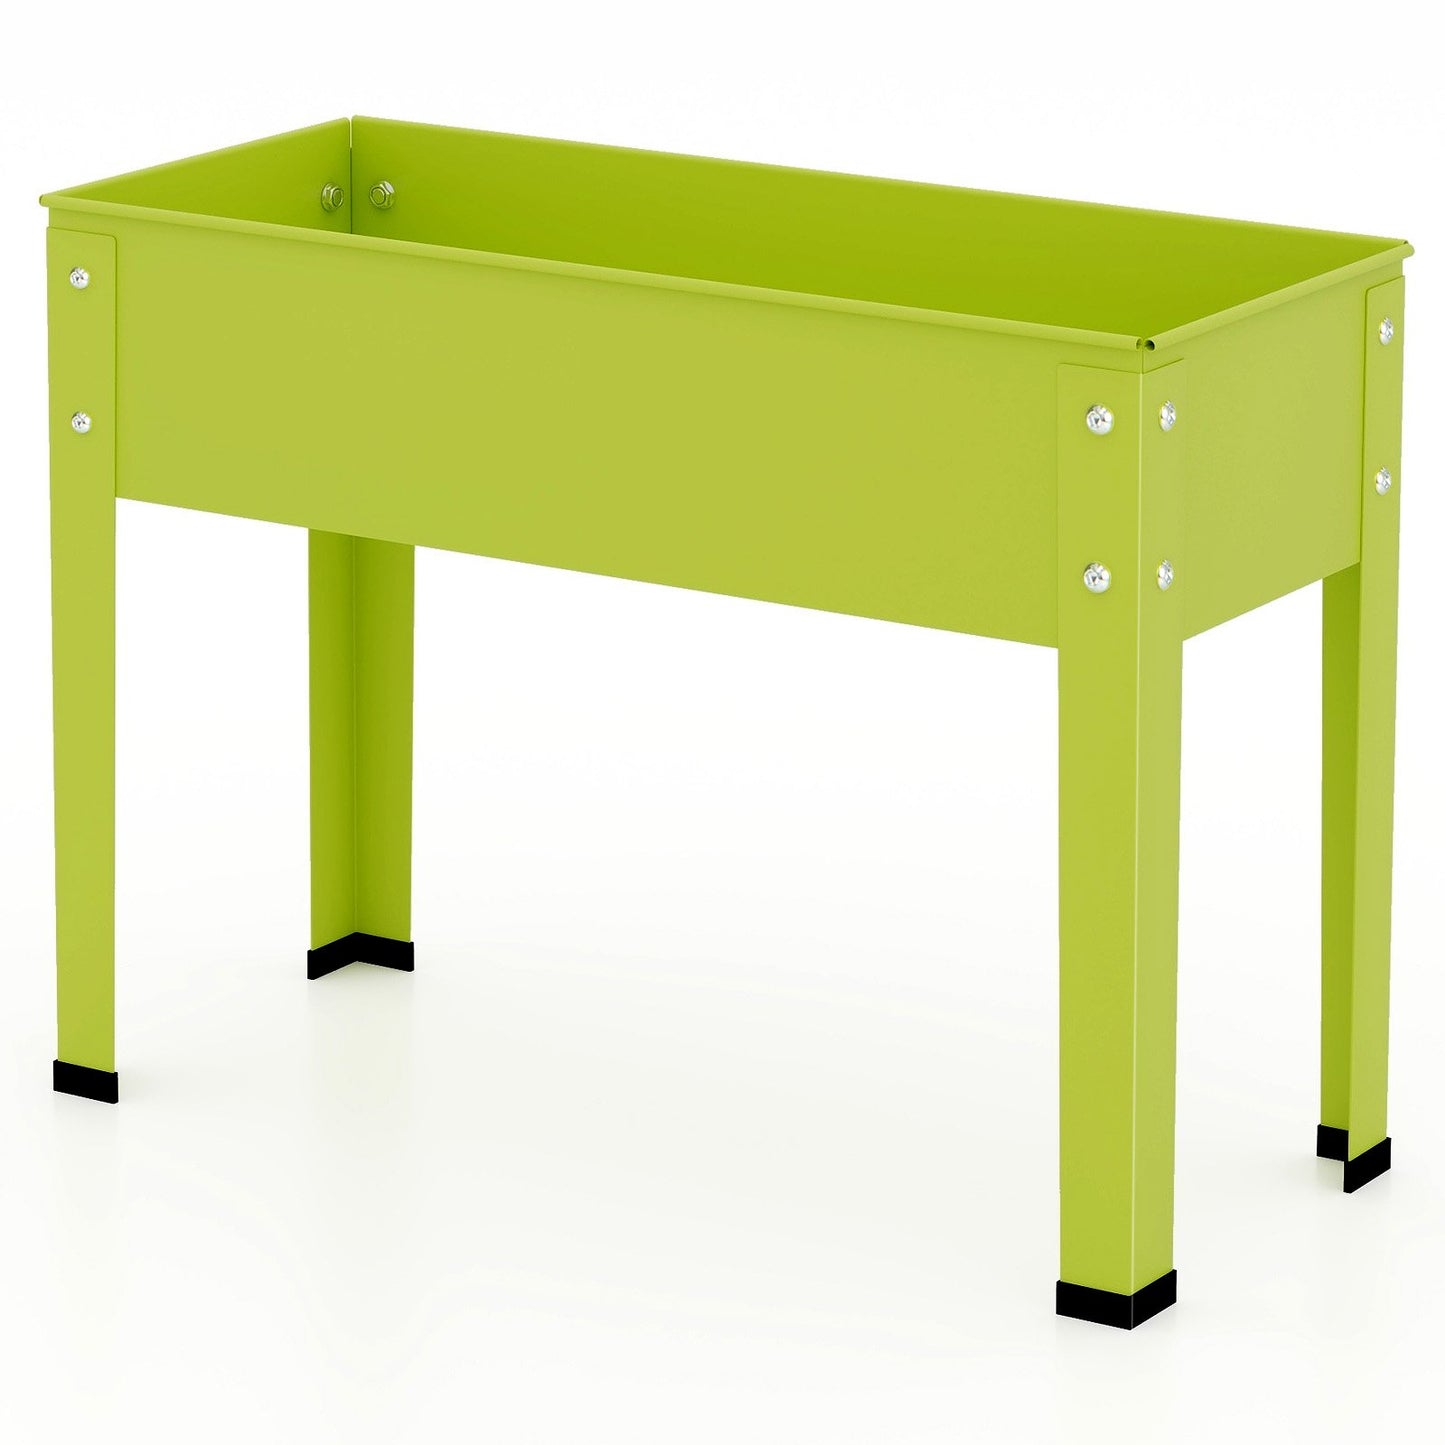 Metal Raised Garden Bed with Legs and Drainage Hole-24 x 11 x 18 inches, Green - Gallery Canada